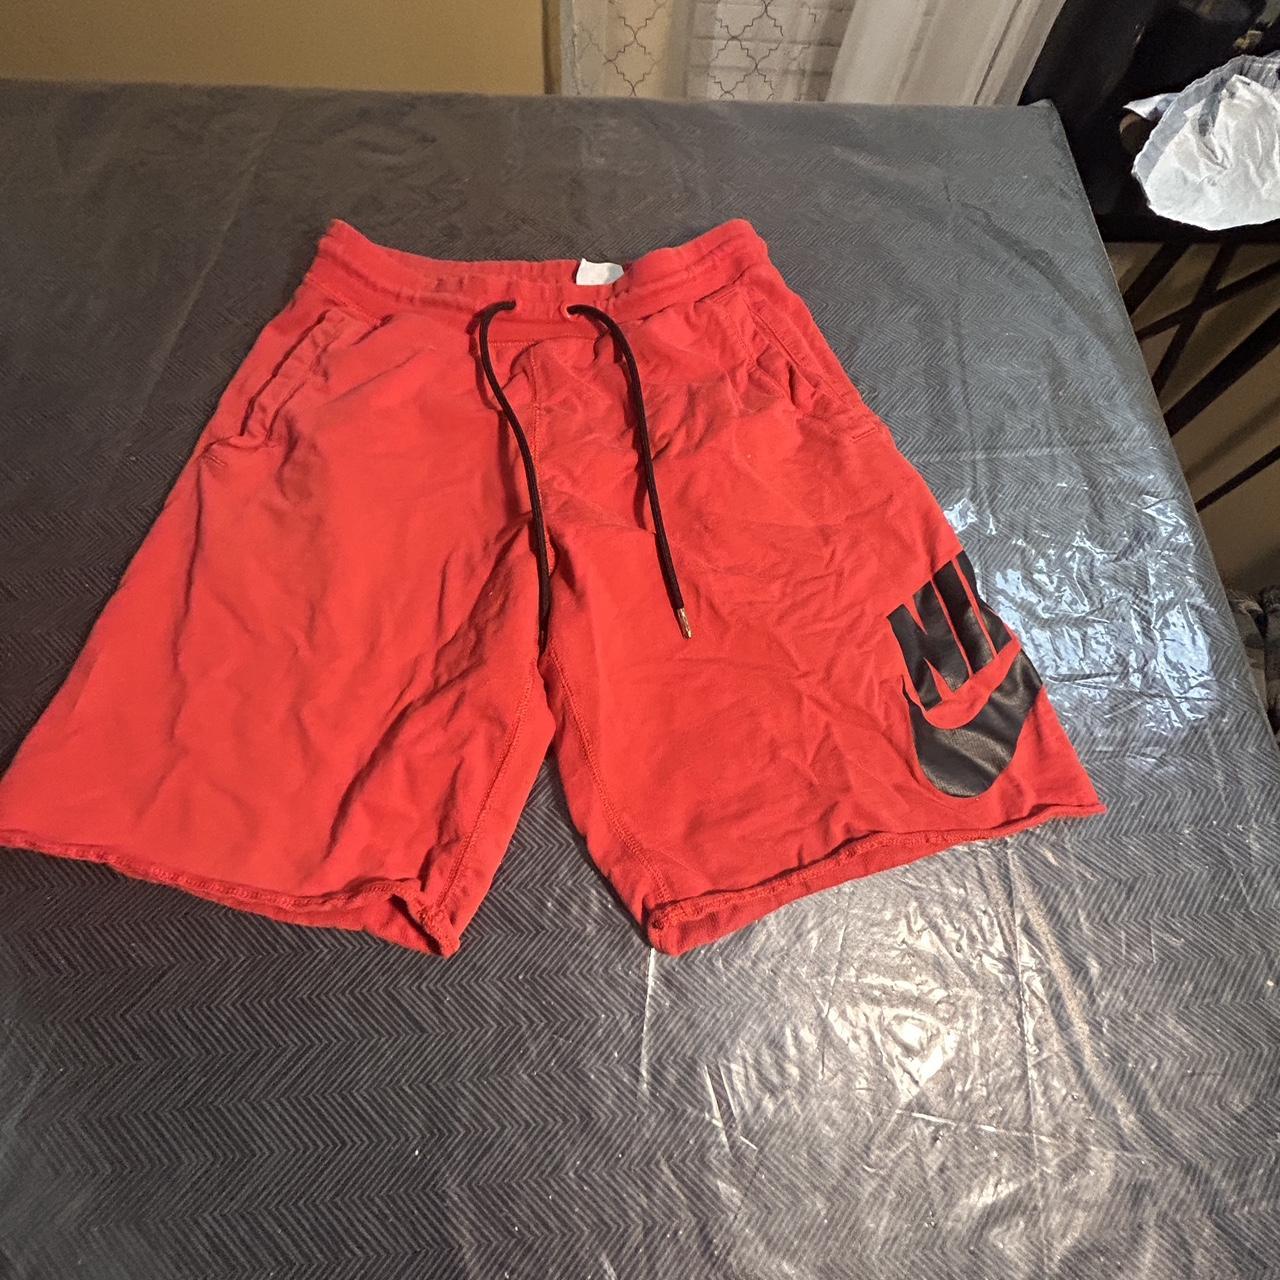 Red Nike shorts new* - Depop